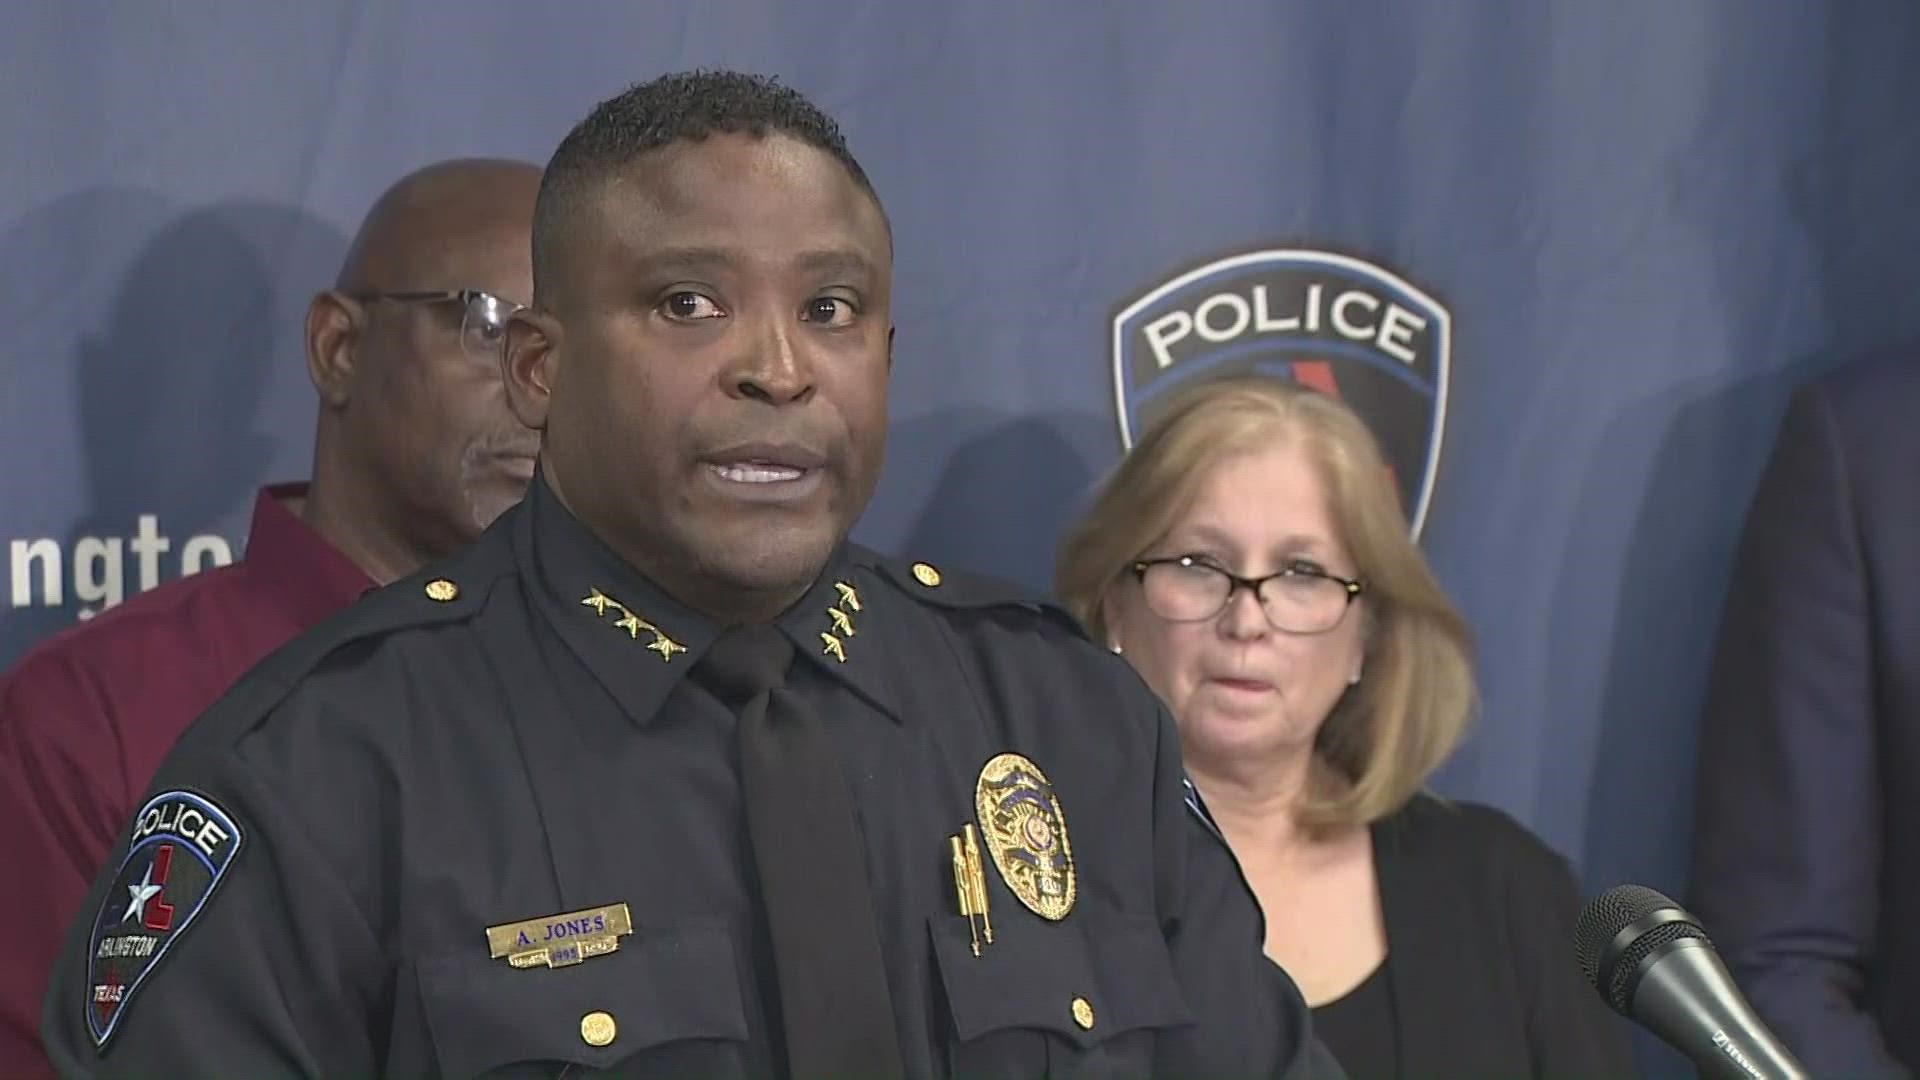 Arlington's police chief was asked what the officer involved in the fatal shooting of a man could have done instead of resorting to deadly force.